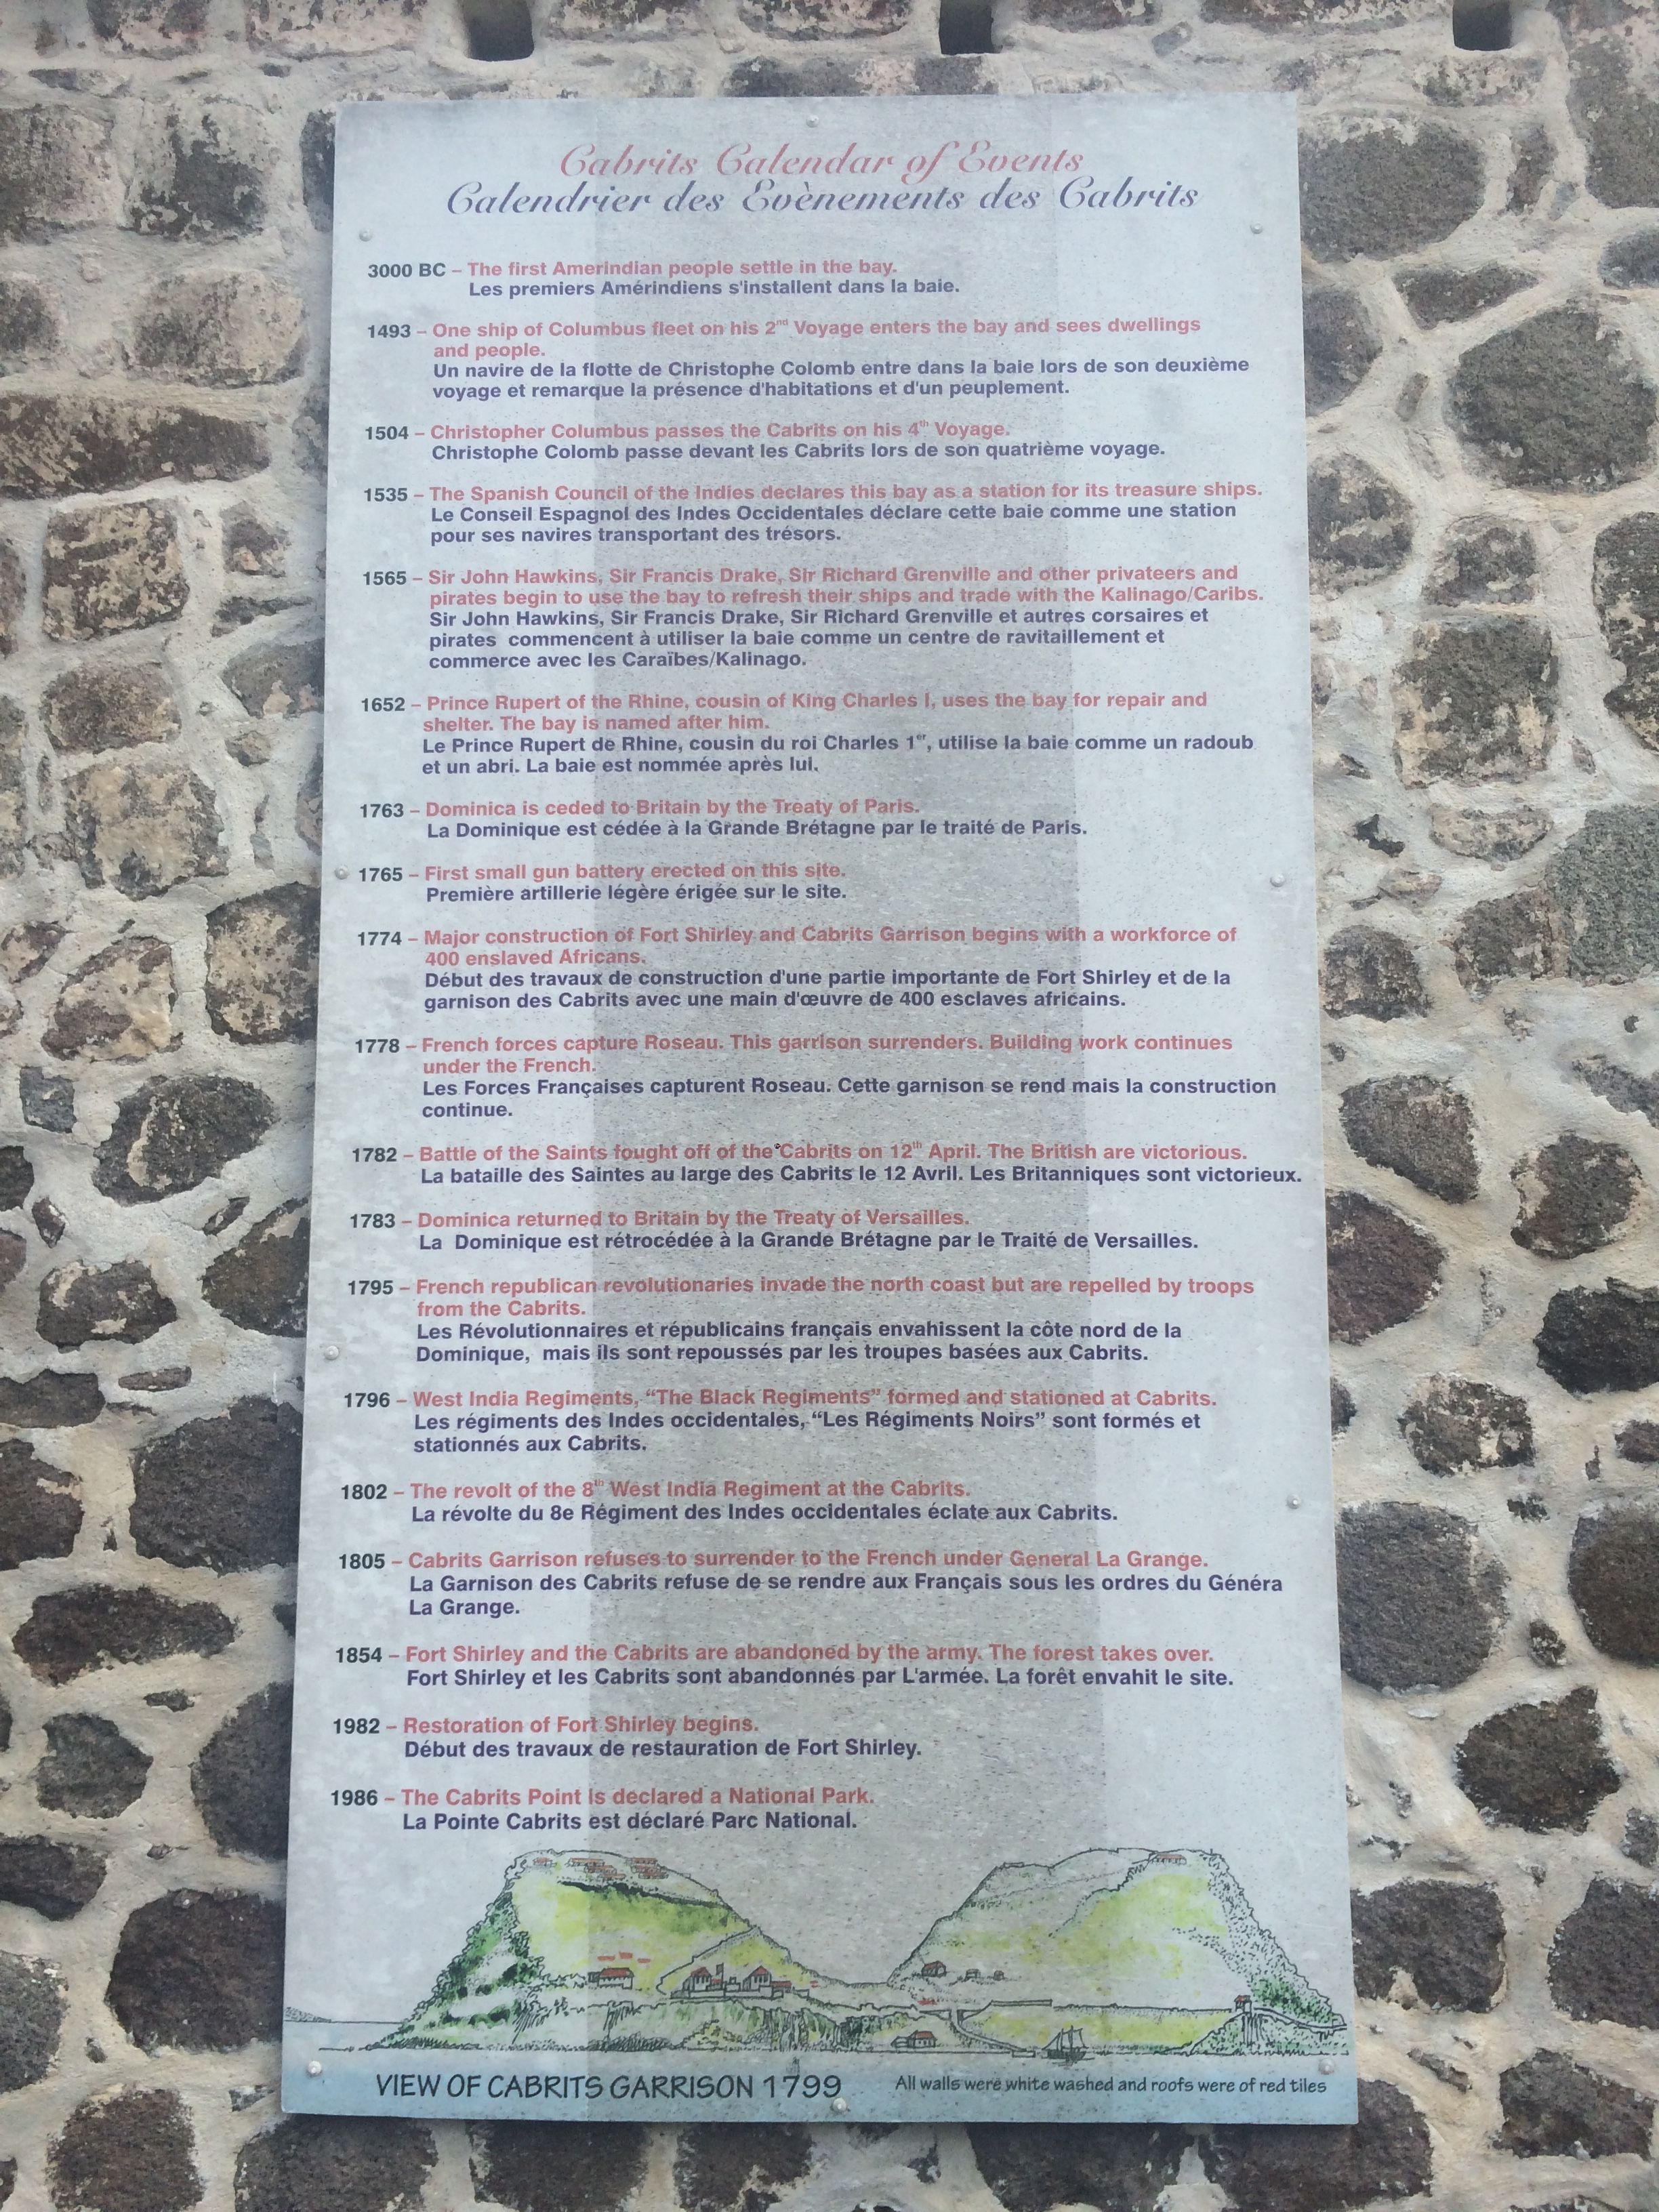 Cabrits Calendar of Events Marker